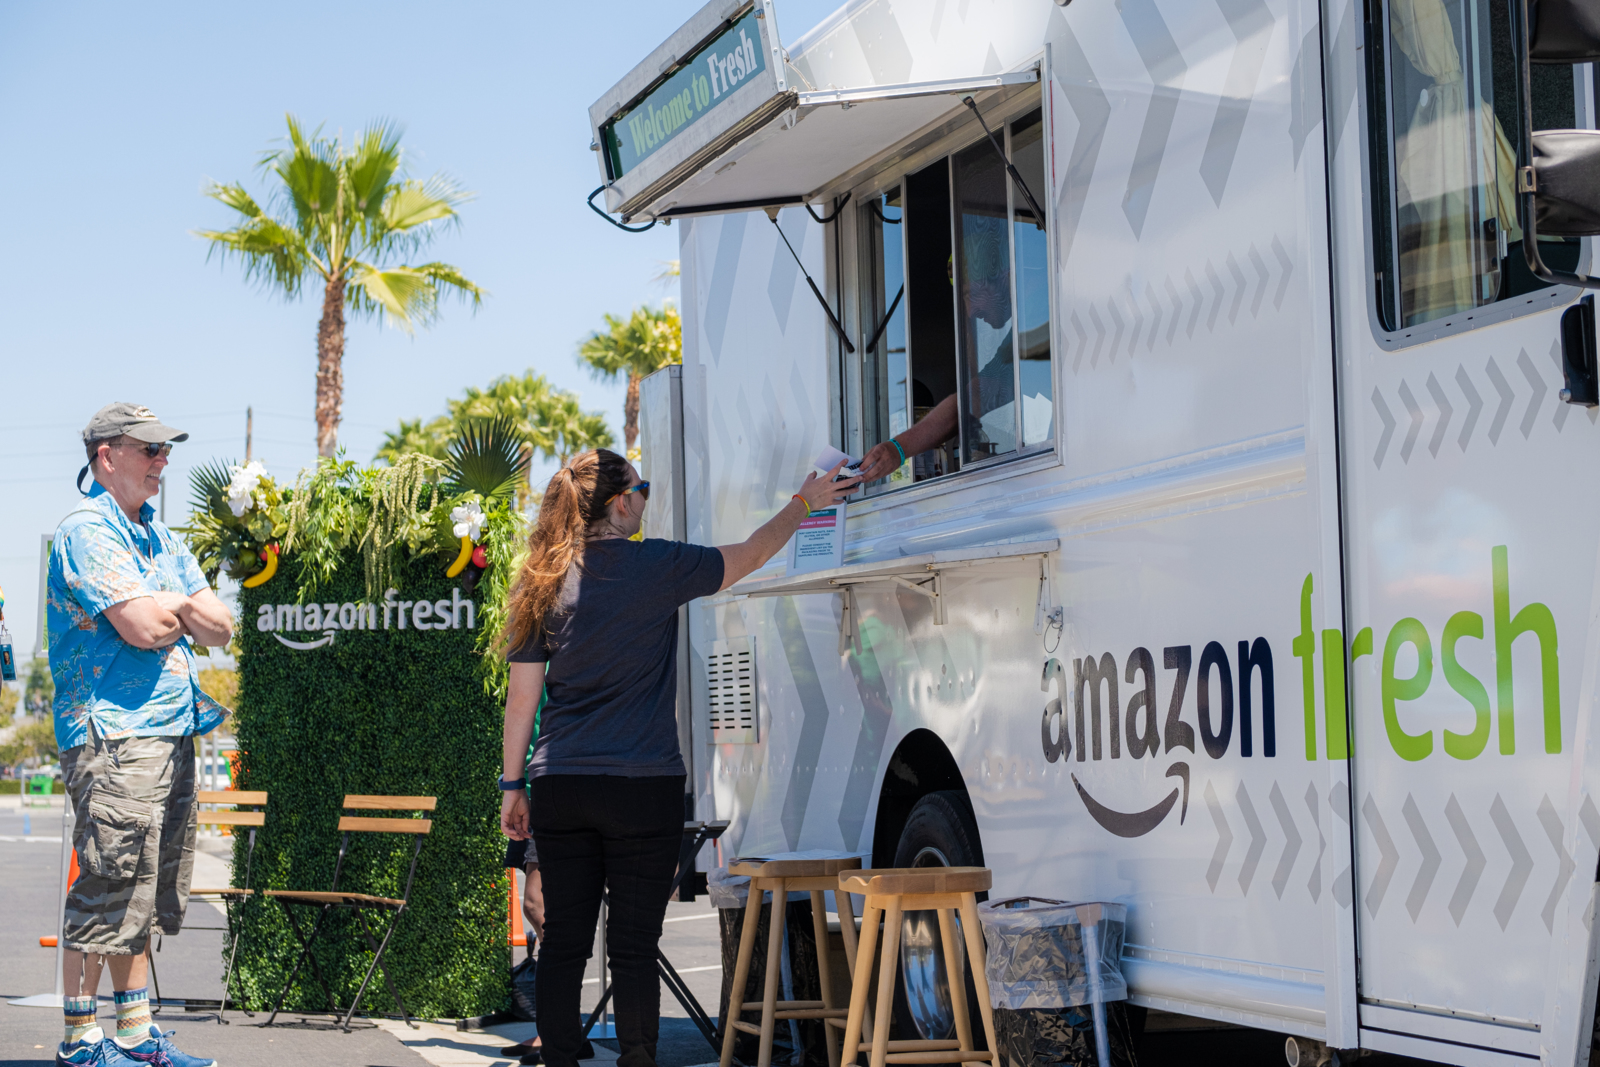 Amazon Fresh Naperville food truck with man and woman standing by it